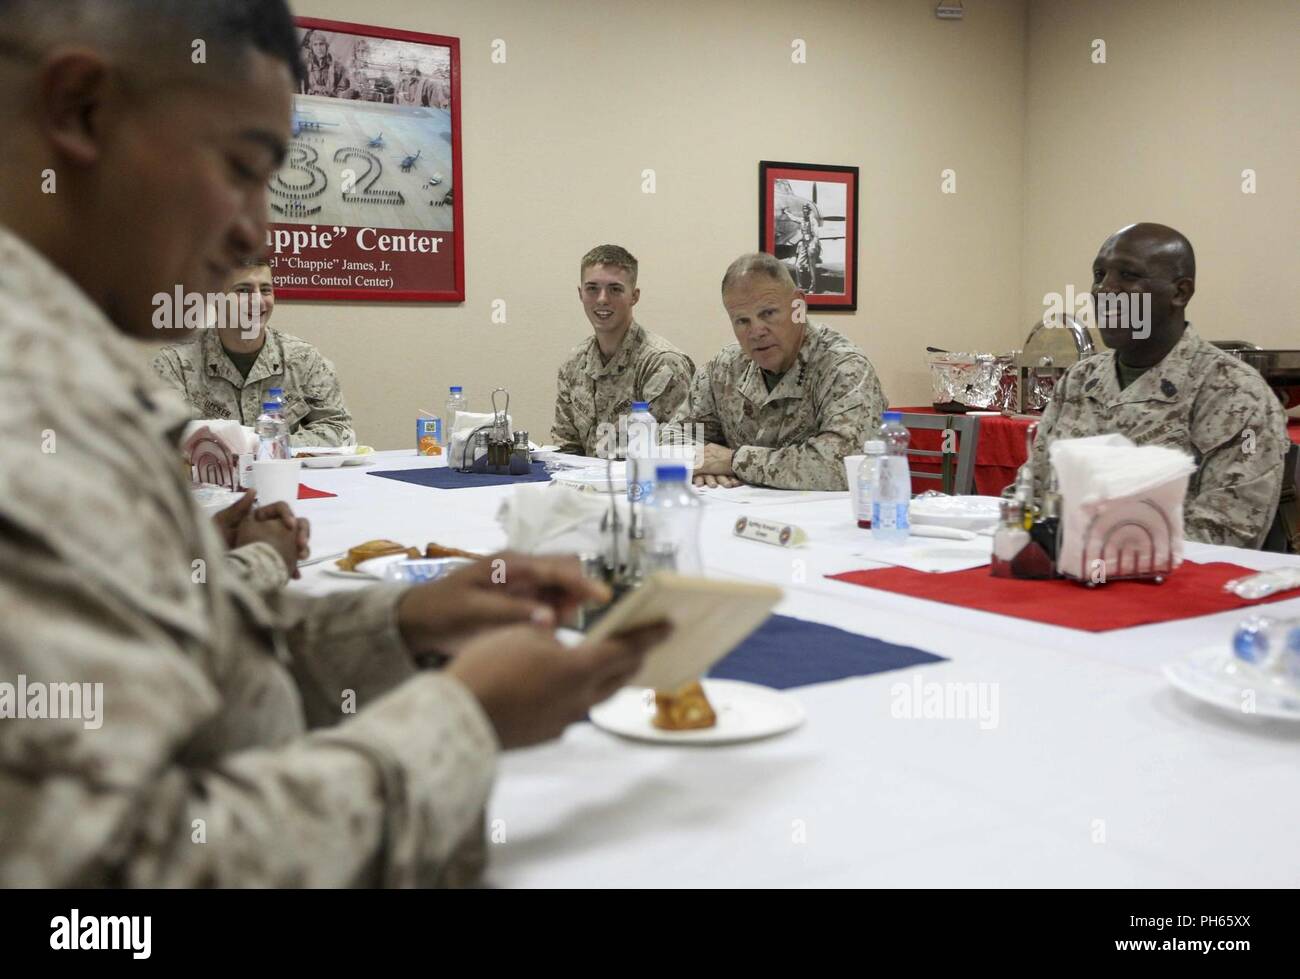 Commandant of the Marine Corps Gen. Robert B. Neller and Sgt. Maj. Ronald L. Green, sergeant major of the Marine Corps with Marines during breakfast in Al Jaber, Kuwait, June 26, 2018. Gen. Neller and Sgt. Maj. Green asked the Marines for ideas to improve the Marine Corps and answered questions. Stock Photo